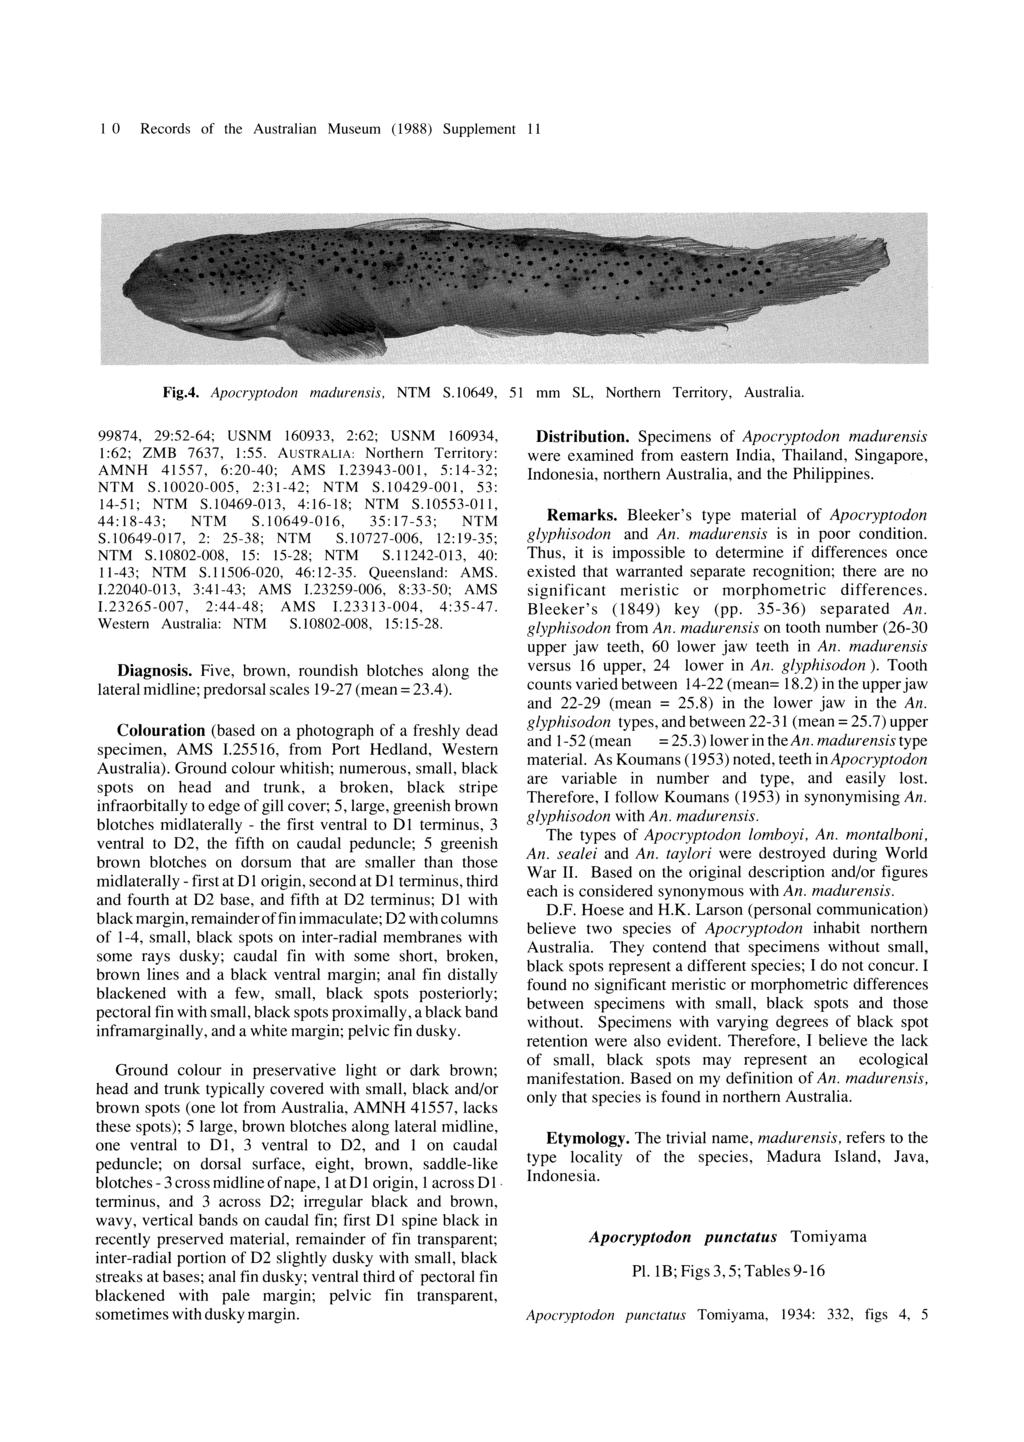 1 0 Records of the Australian Museum (1988) Supplement 11 Fig.4. Apocryptodon madurensis, NTM S,649, 51 99874, 29:52-64; USNM 160933, 2:62; USNM 160934, 1 :62; 2MB 7637, 1 :55.